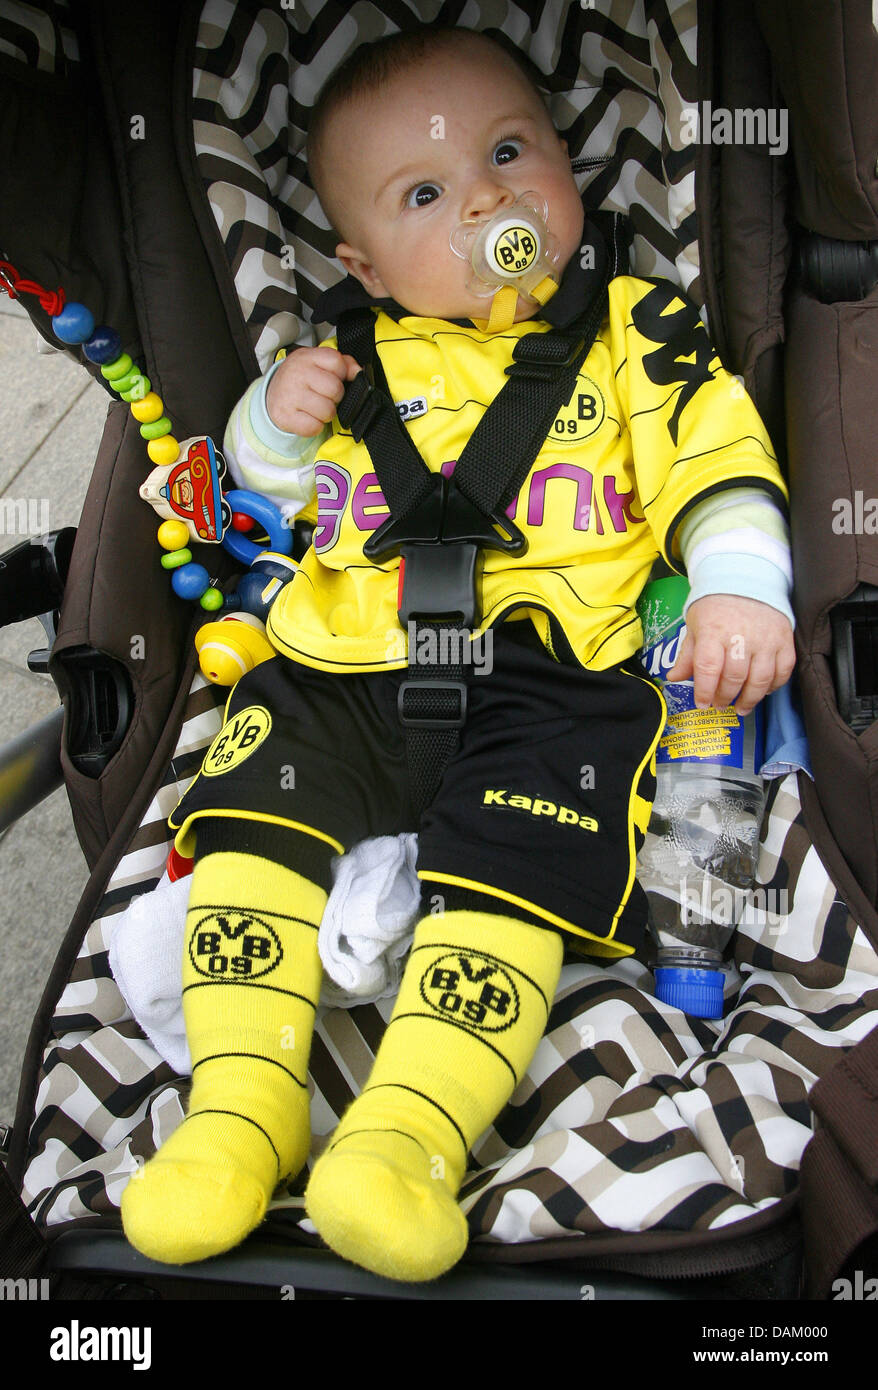 Six-month-old Ronny sucks on pacifier with a BVB-logo on it at the Old  Market prior to the Bundesliga match Borussia Dortmund vs. Eintracht  Frankfurt in Dortmund, Germany, 14 May 2011. Dortmund is